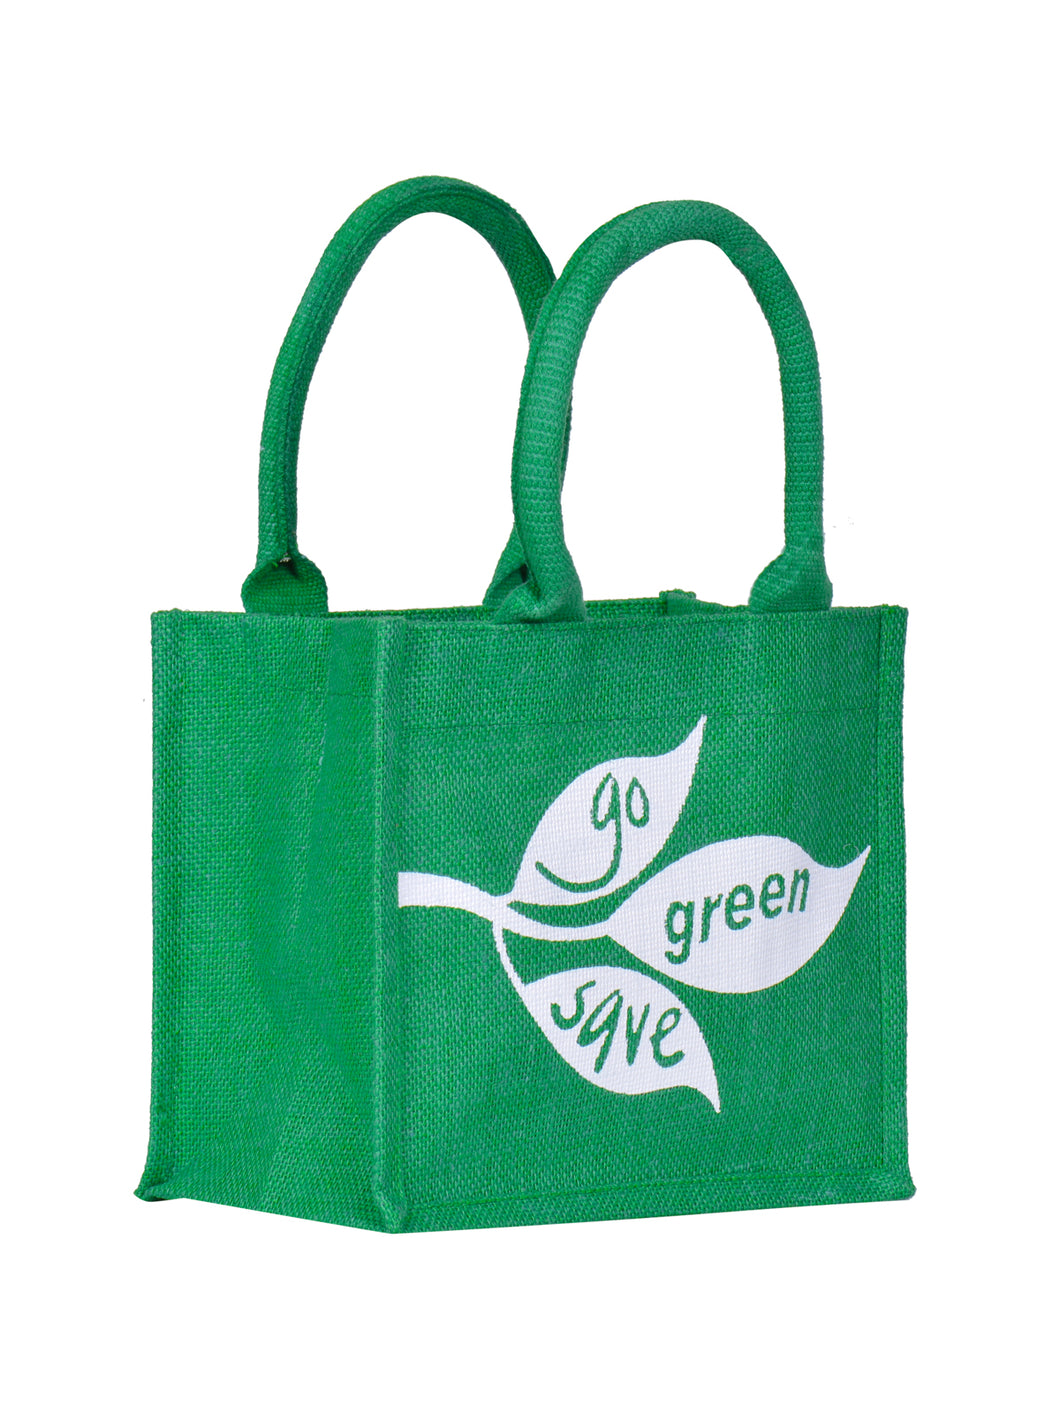 8 X 10 GO GREEN SAVE LUNCH (B-069-GREEN)